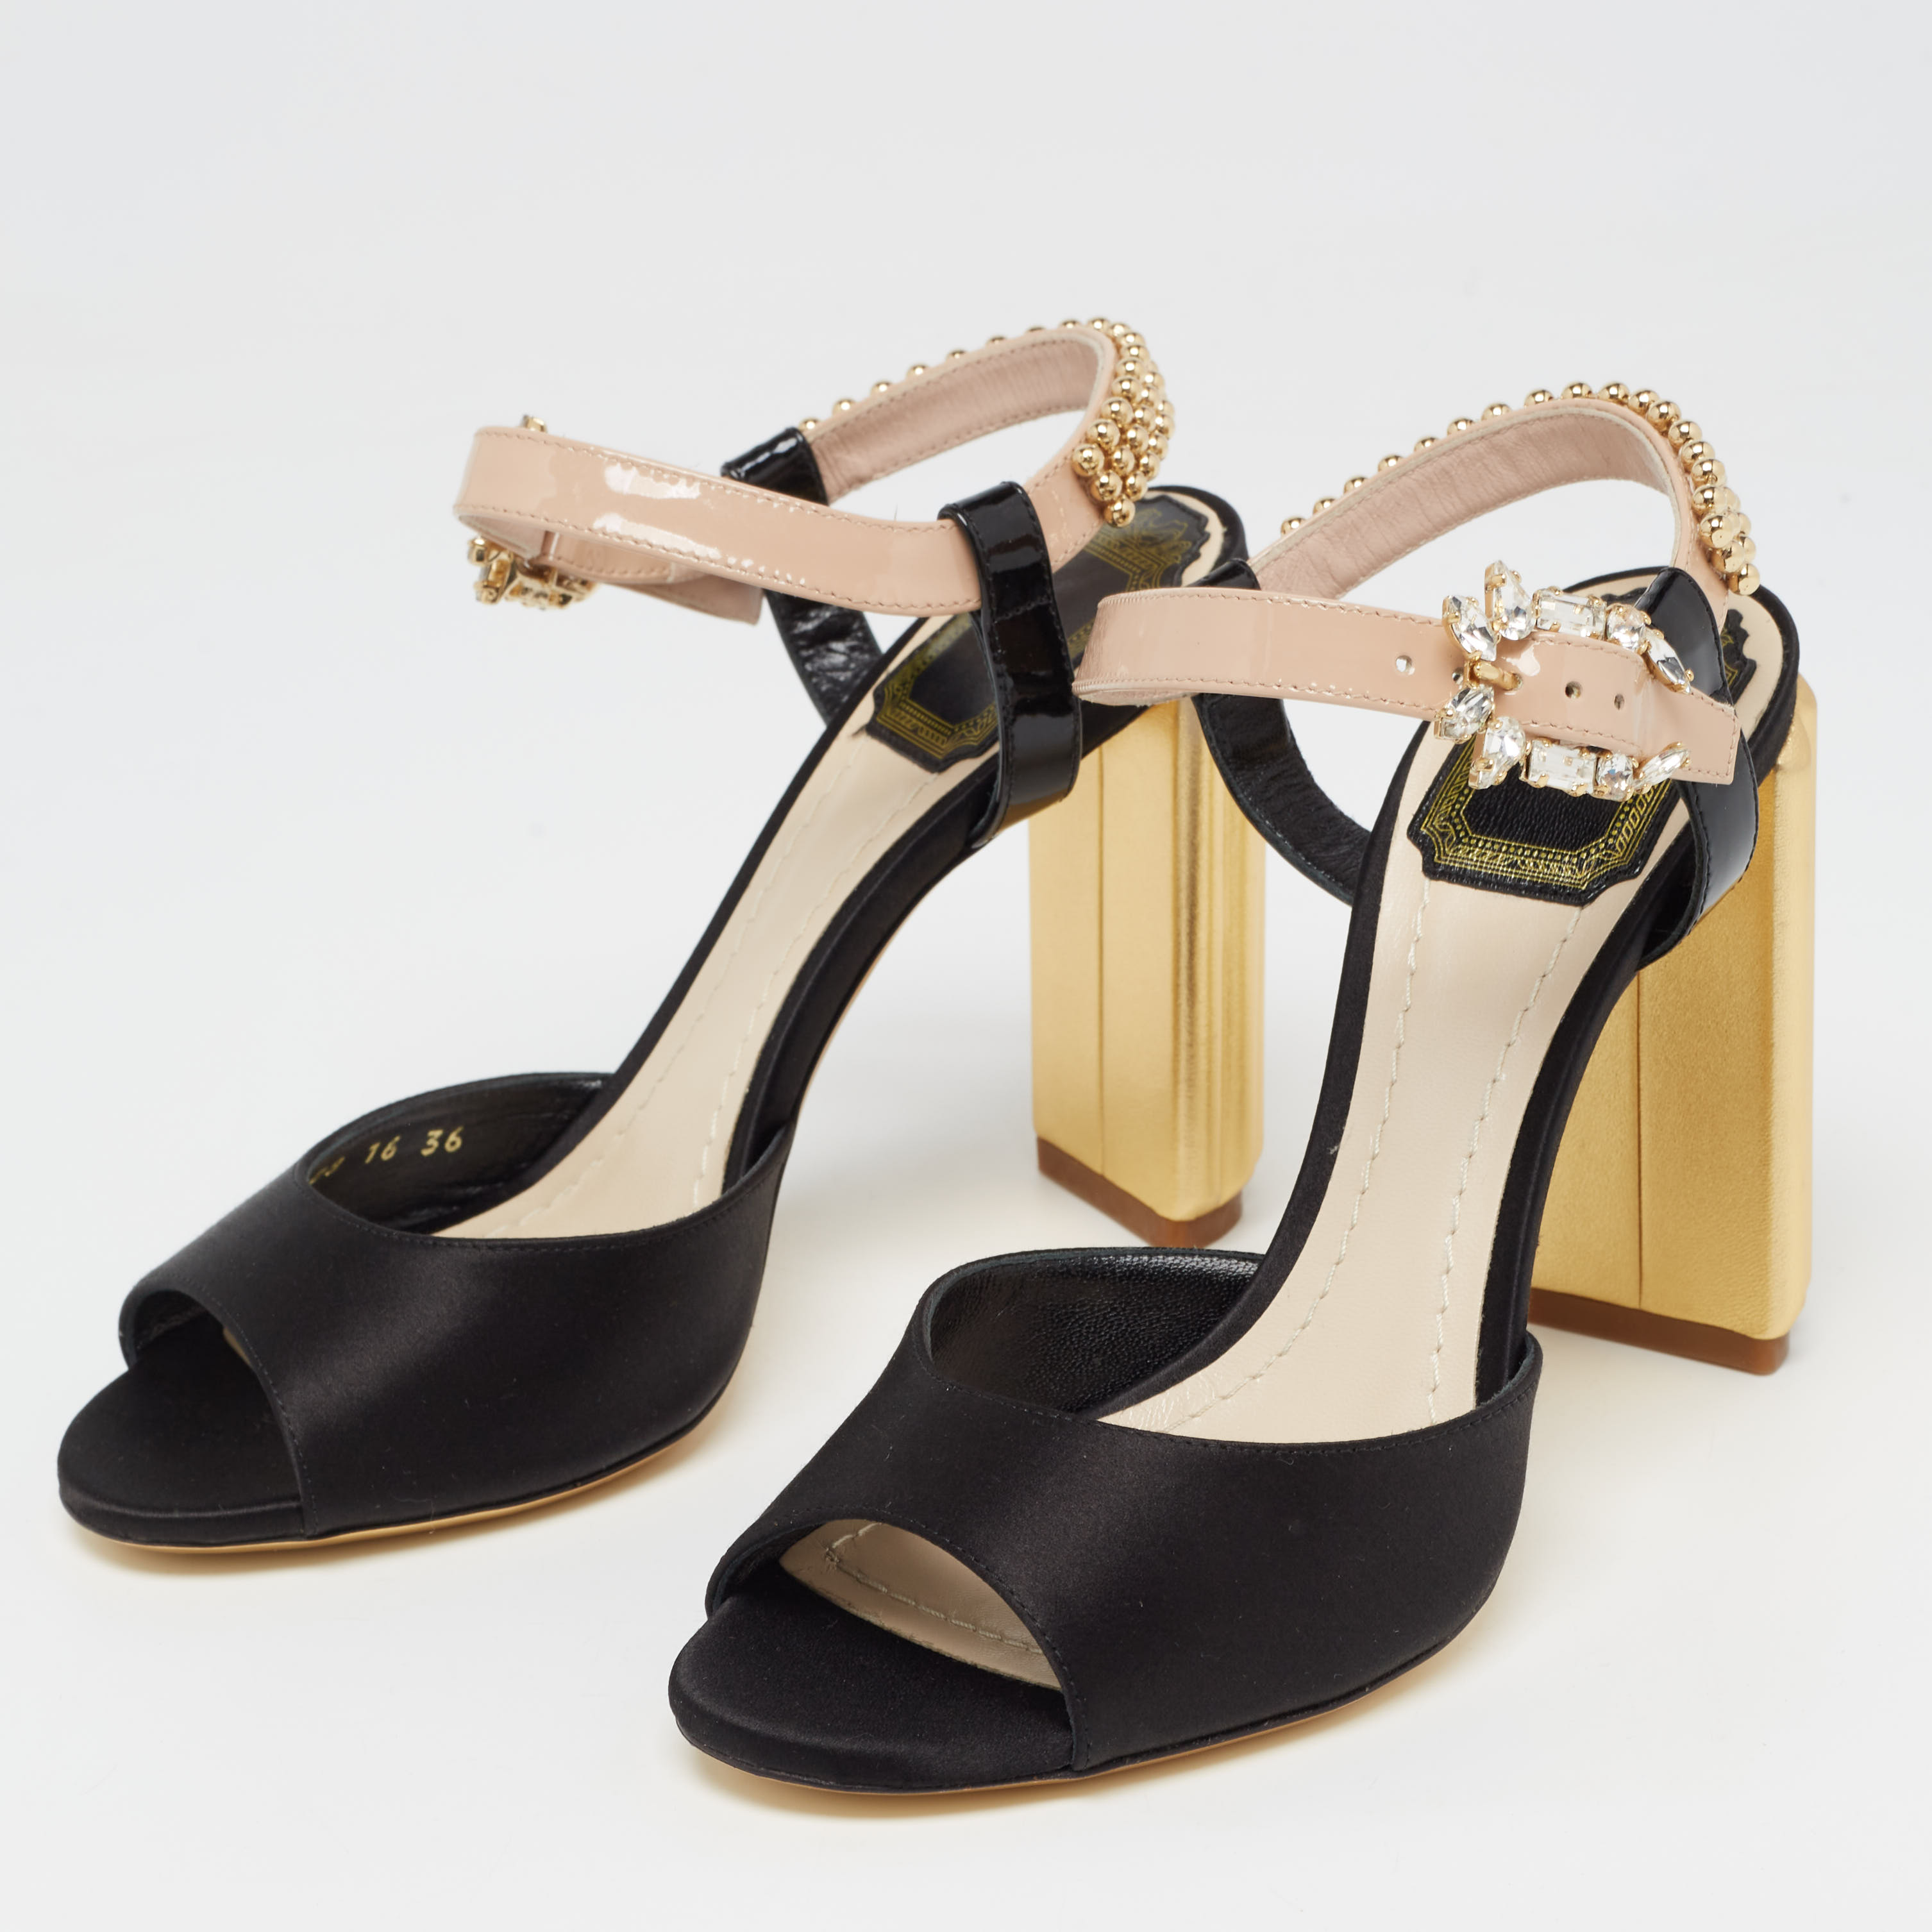 

Dior Black/Beige Satin and Patent Leather Studded Ankle Strap Sandals Size